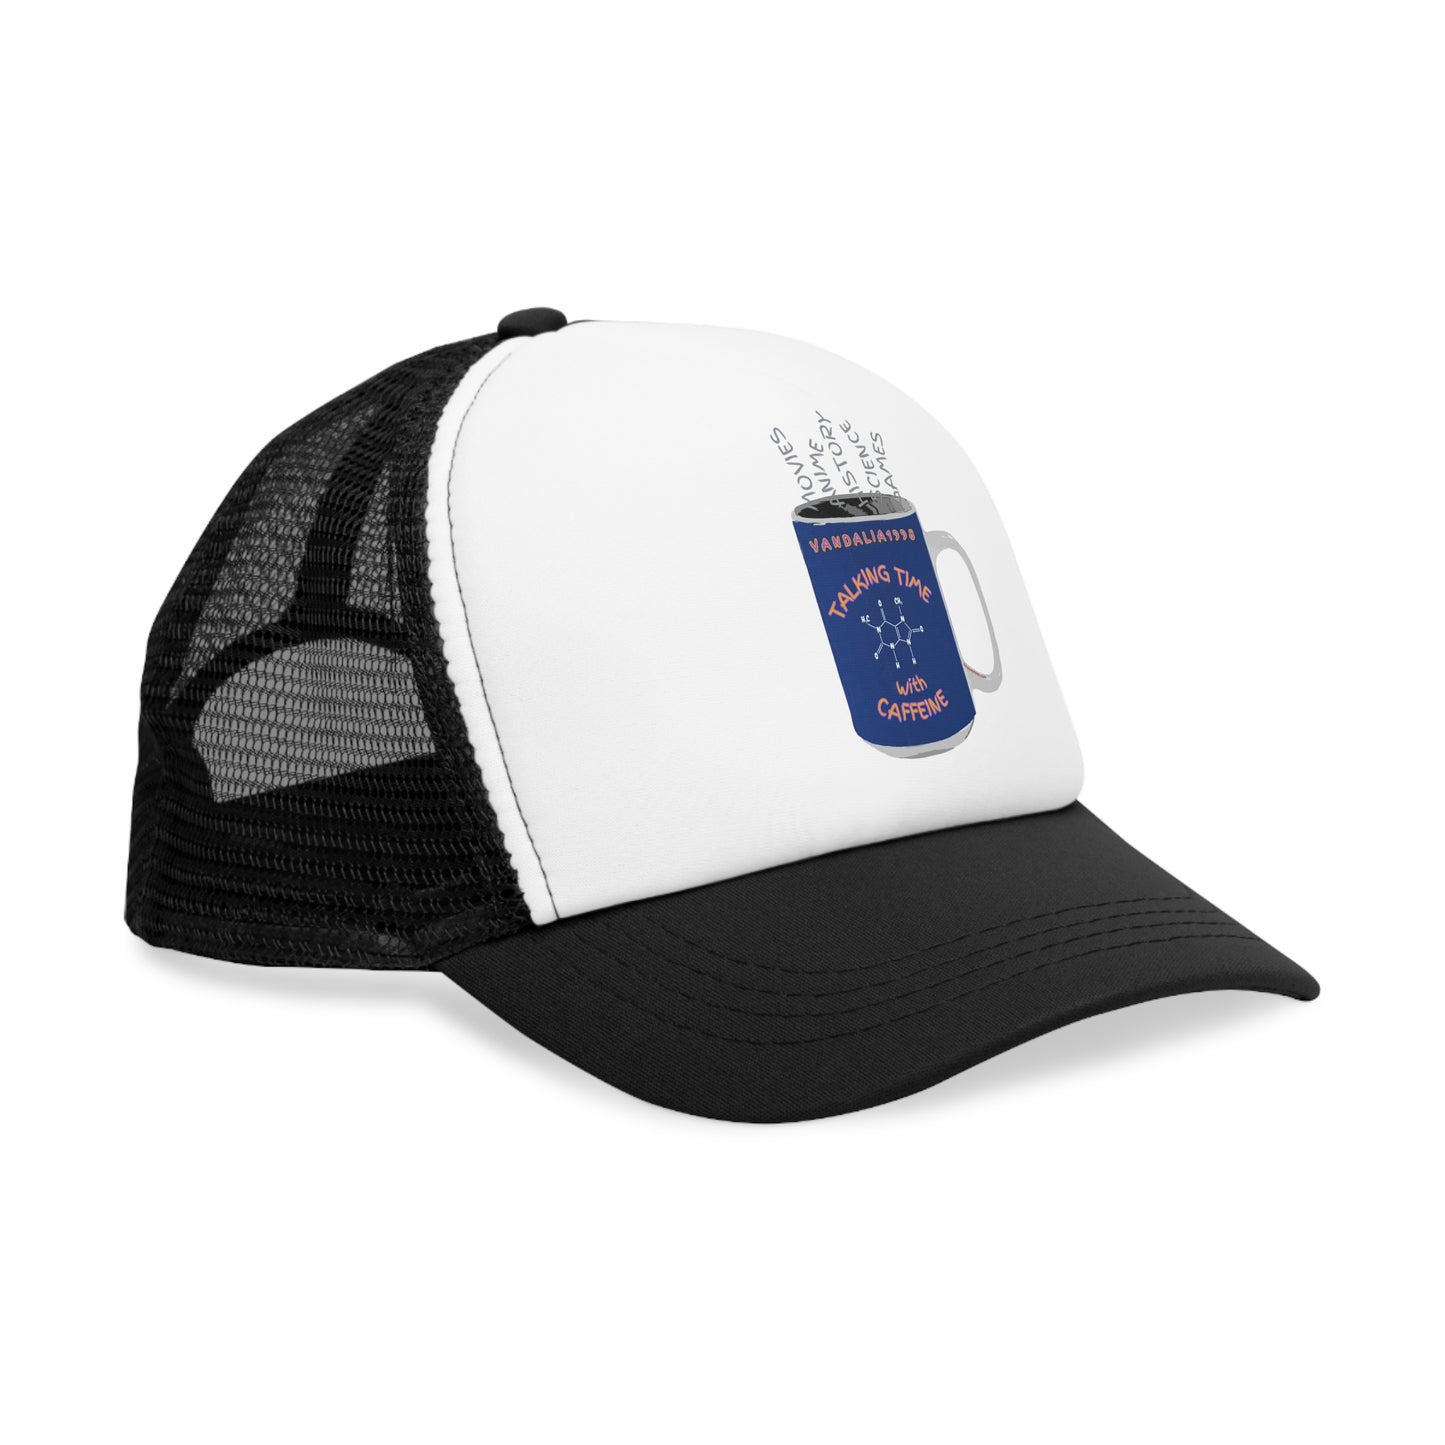 Talking Time With Caffeine Mesh Cap